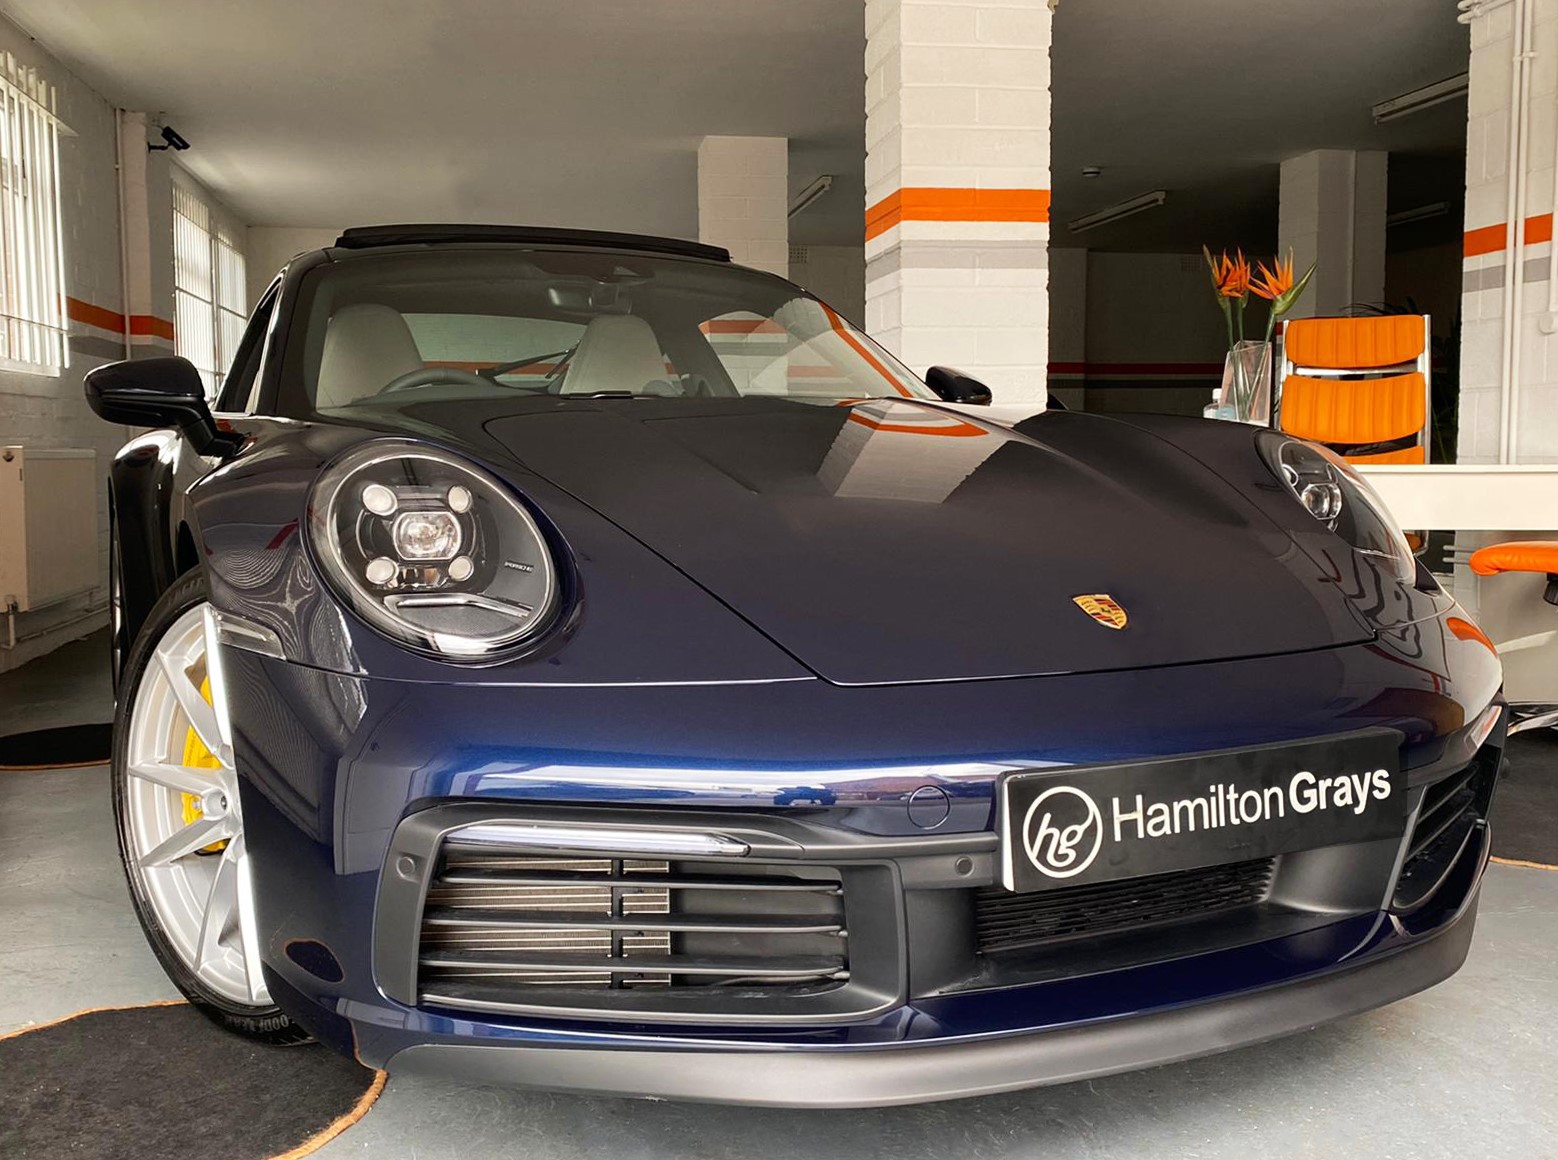 2020 (20) Porsche 911 3.0T [992] C2S PDK. Night Blue Metallic with Two Tone Slate Grey and Crayon Leather Interior. 3 Year Porsche Warranty. Delivery Mileage! (SOLD)